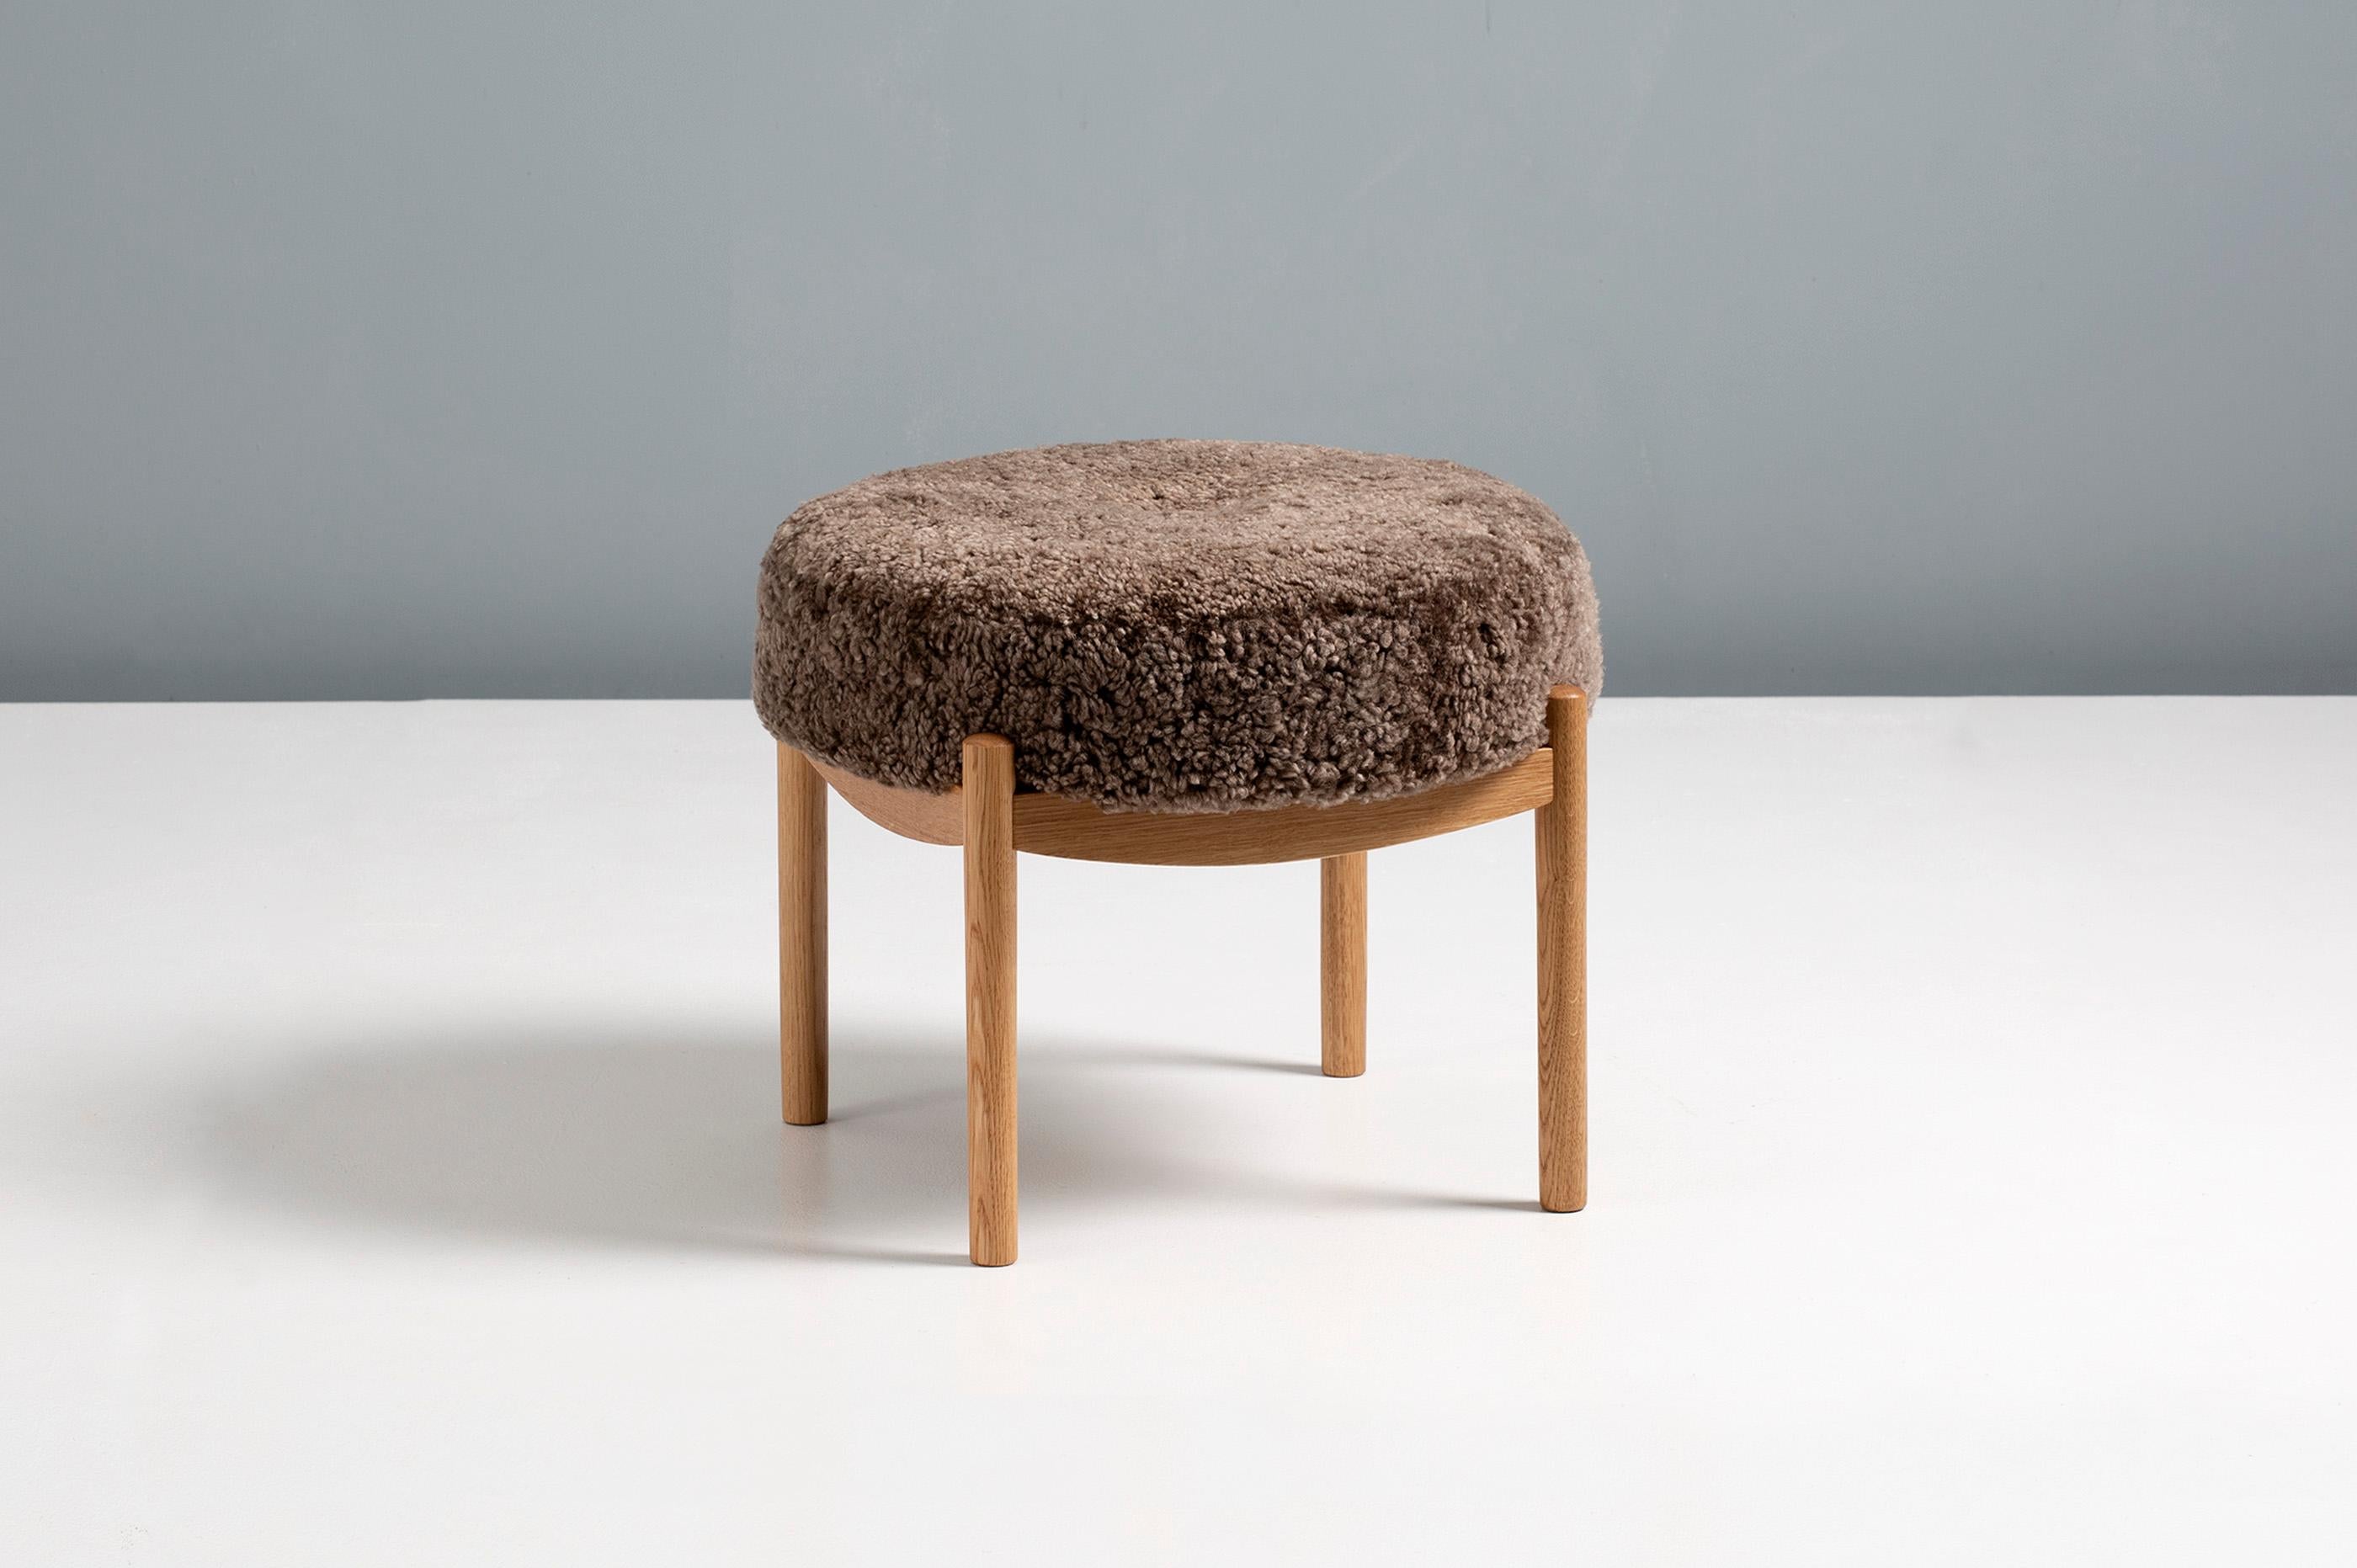 Dagmar Design

Blek Ottoman

A custom-made round ottoman with solid wood frame developed & produced at our workshops in London. This examples have frames in oiled European oak and a seat upholstered in Sahara brown sheepskin. THe Blek stool is